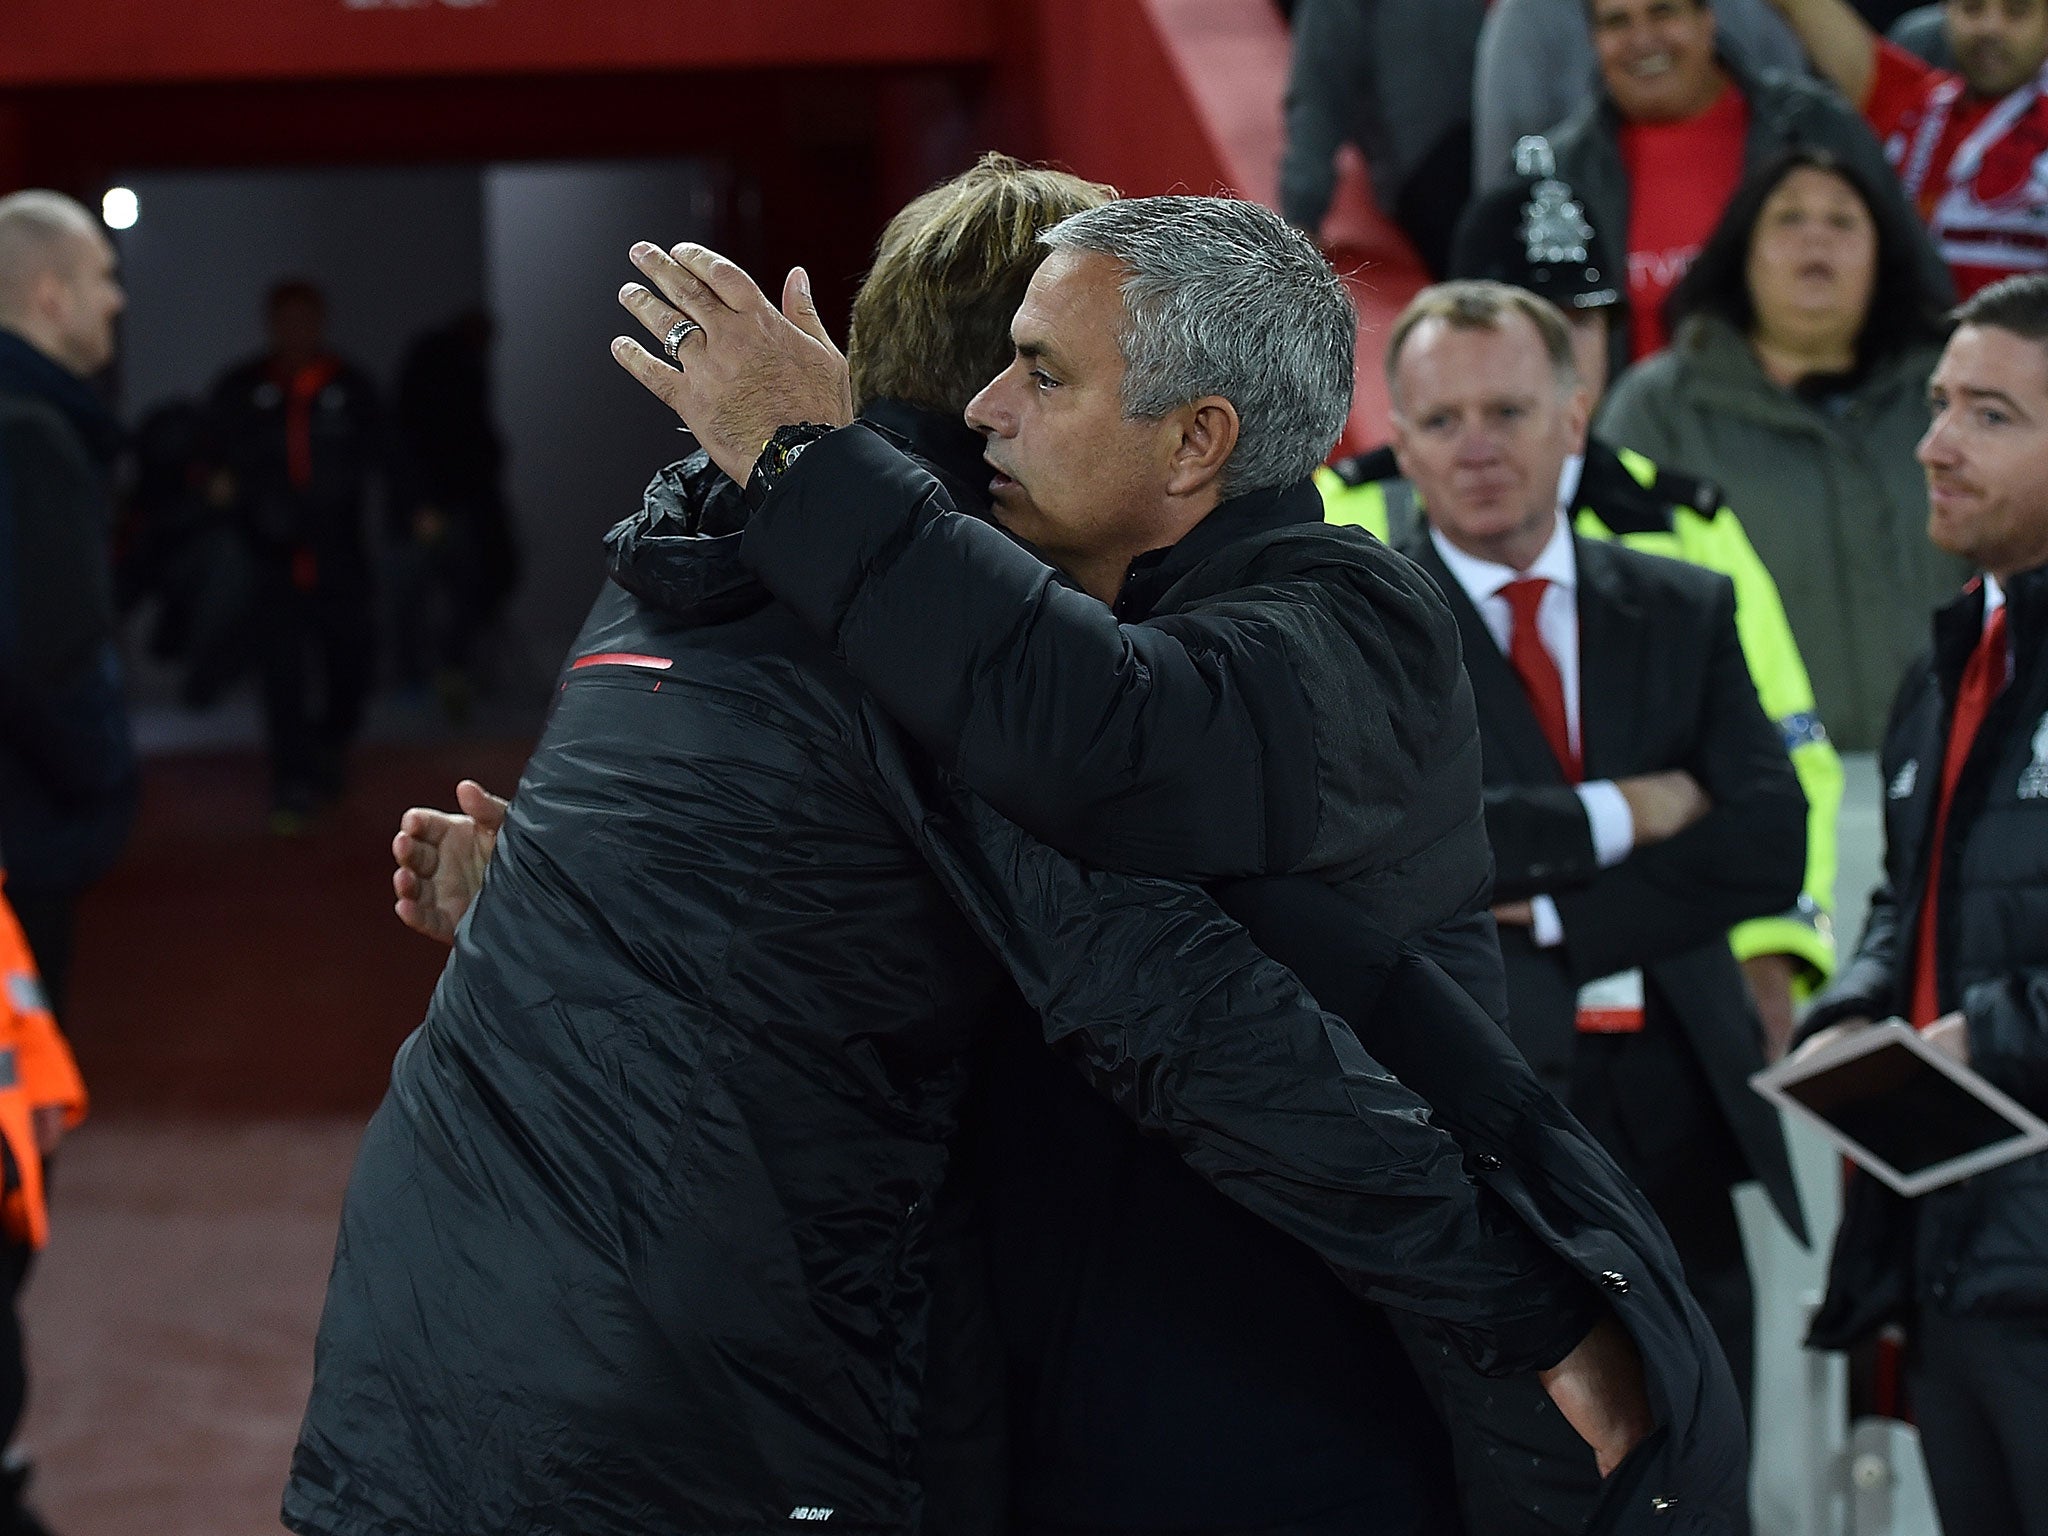 Klopp and Mourinho were friendly pre-match, but clashed during the game